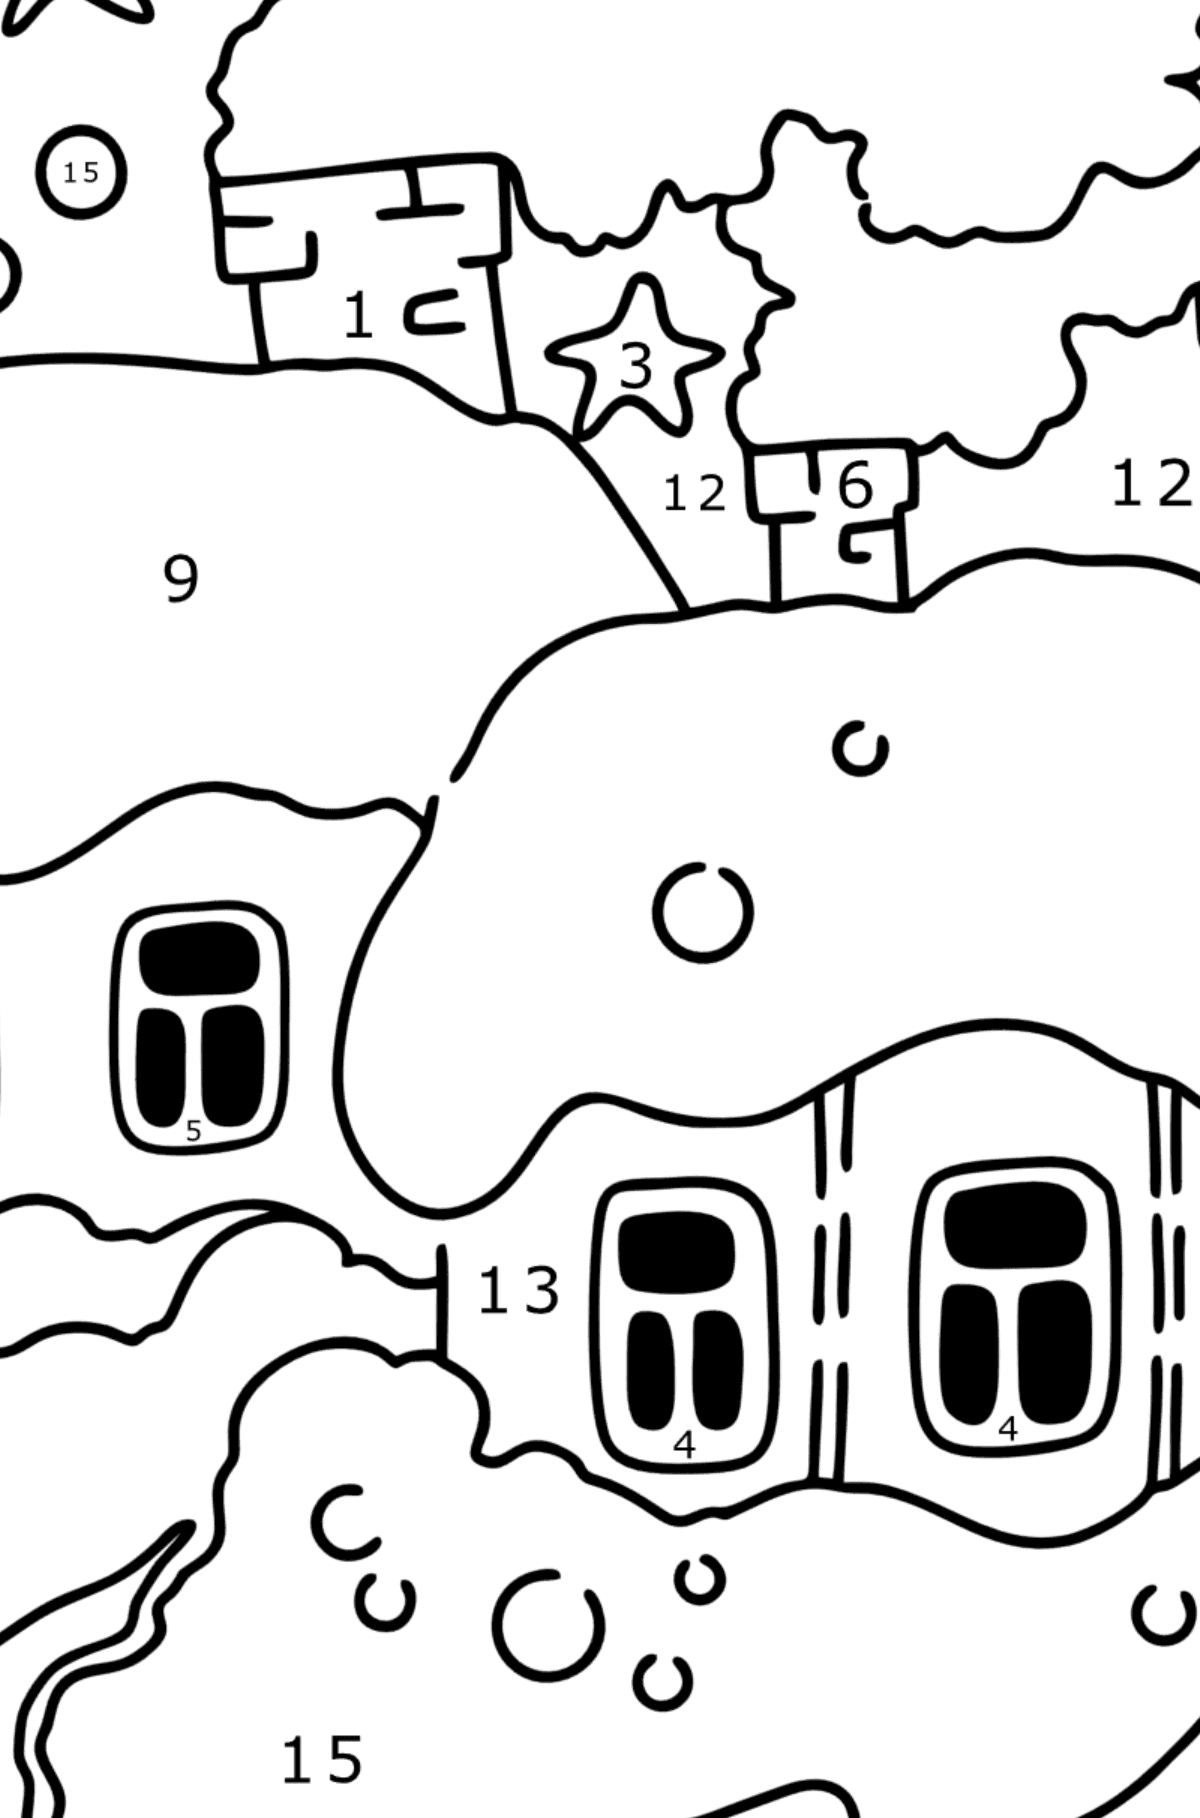 Coloring page - Winter Night - Coloring by Numbers for Kids